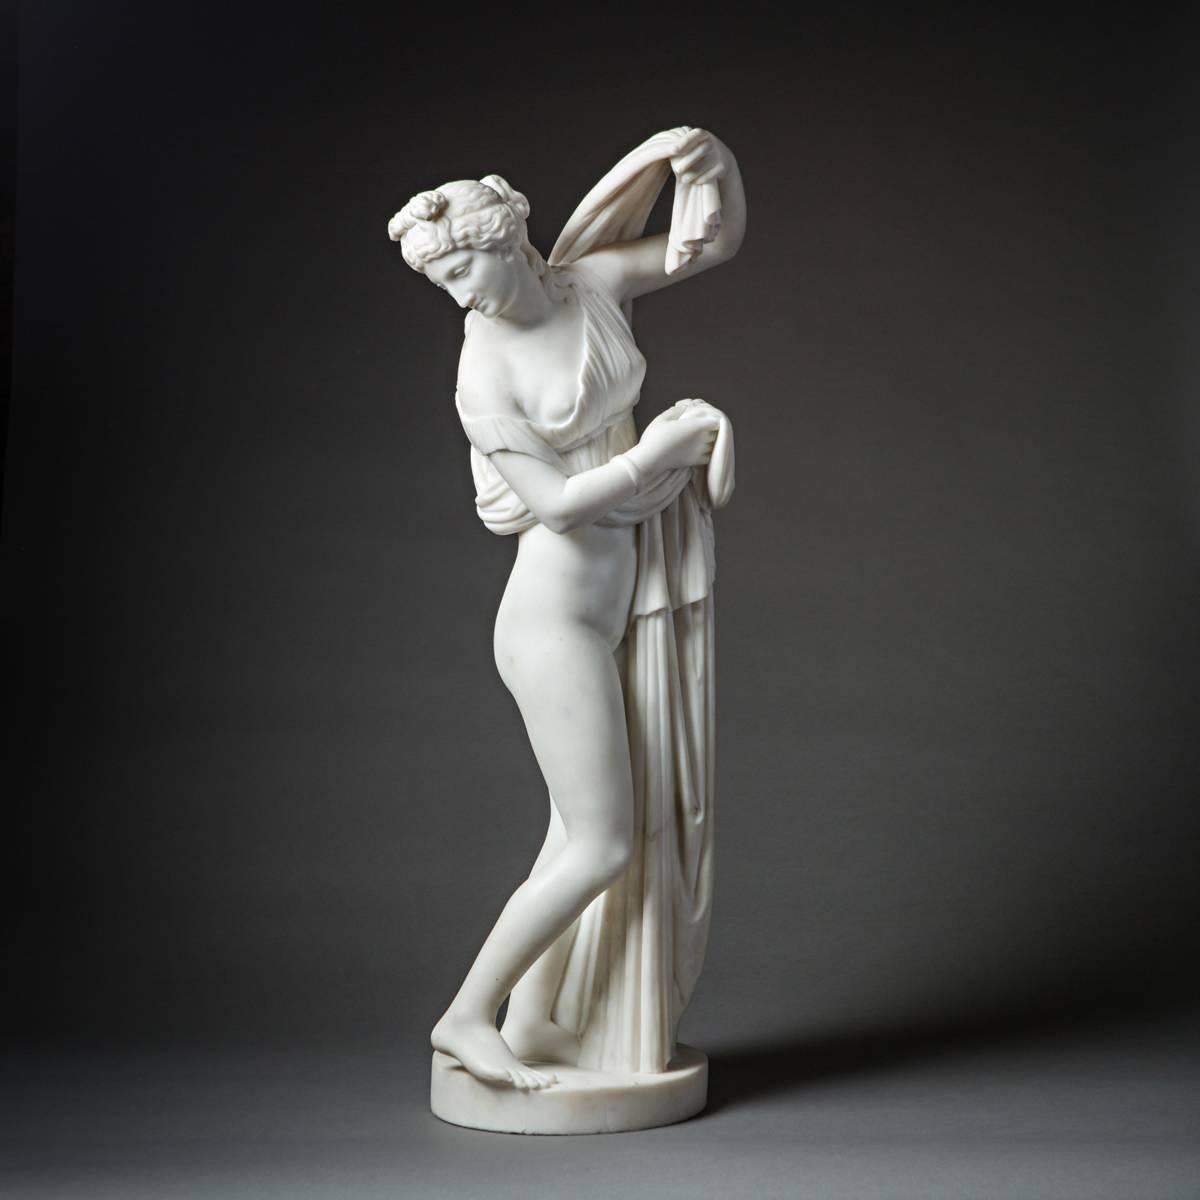 This superb sculpture is a representation of mythology’s most famous women: Aphrodite. She is rendered in a traditionally sensuous and dramatic pose, resting her weight on her left leg, the right slightly flexed with the toes touching the ground.